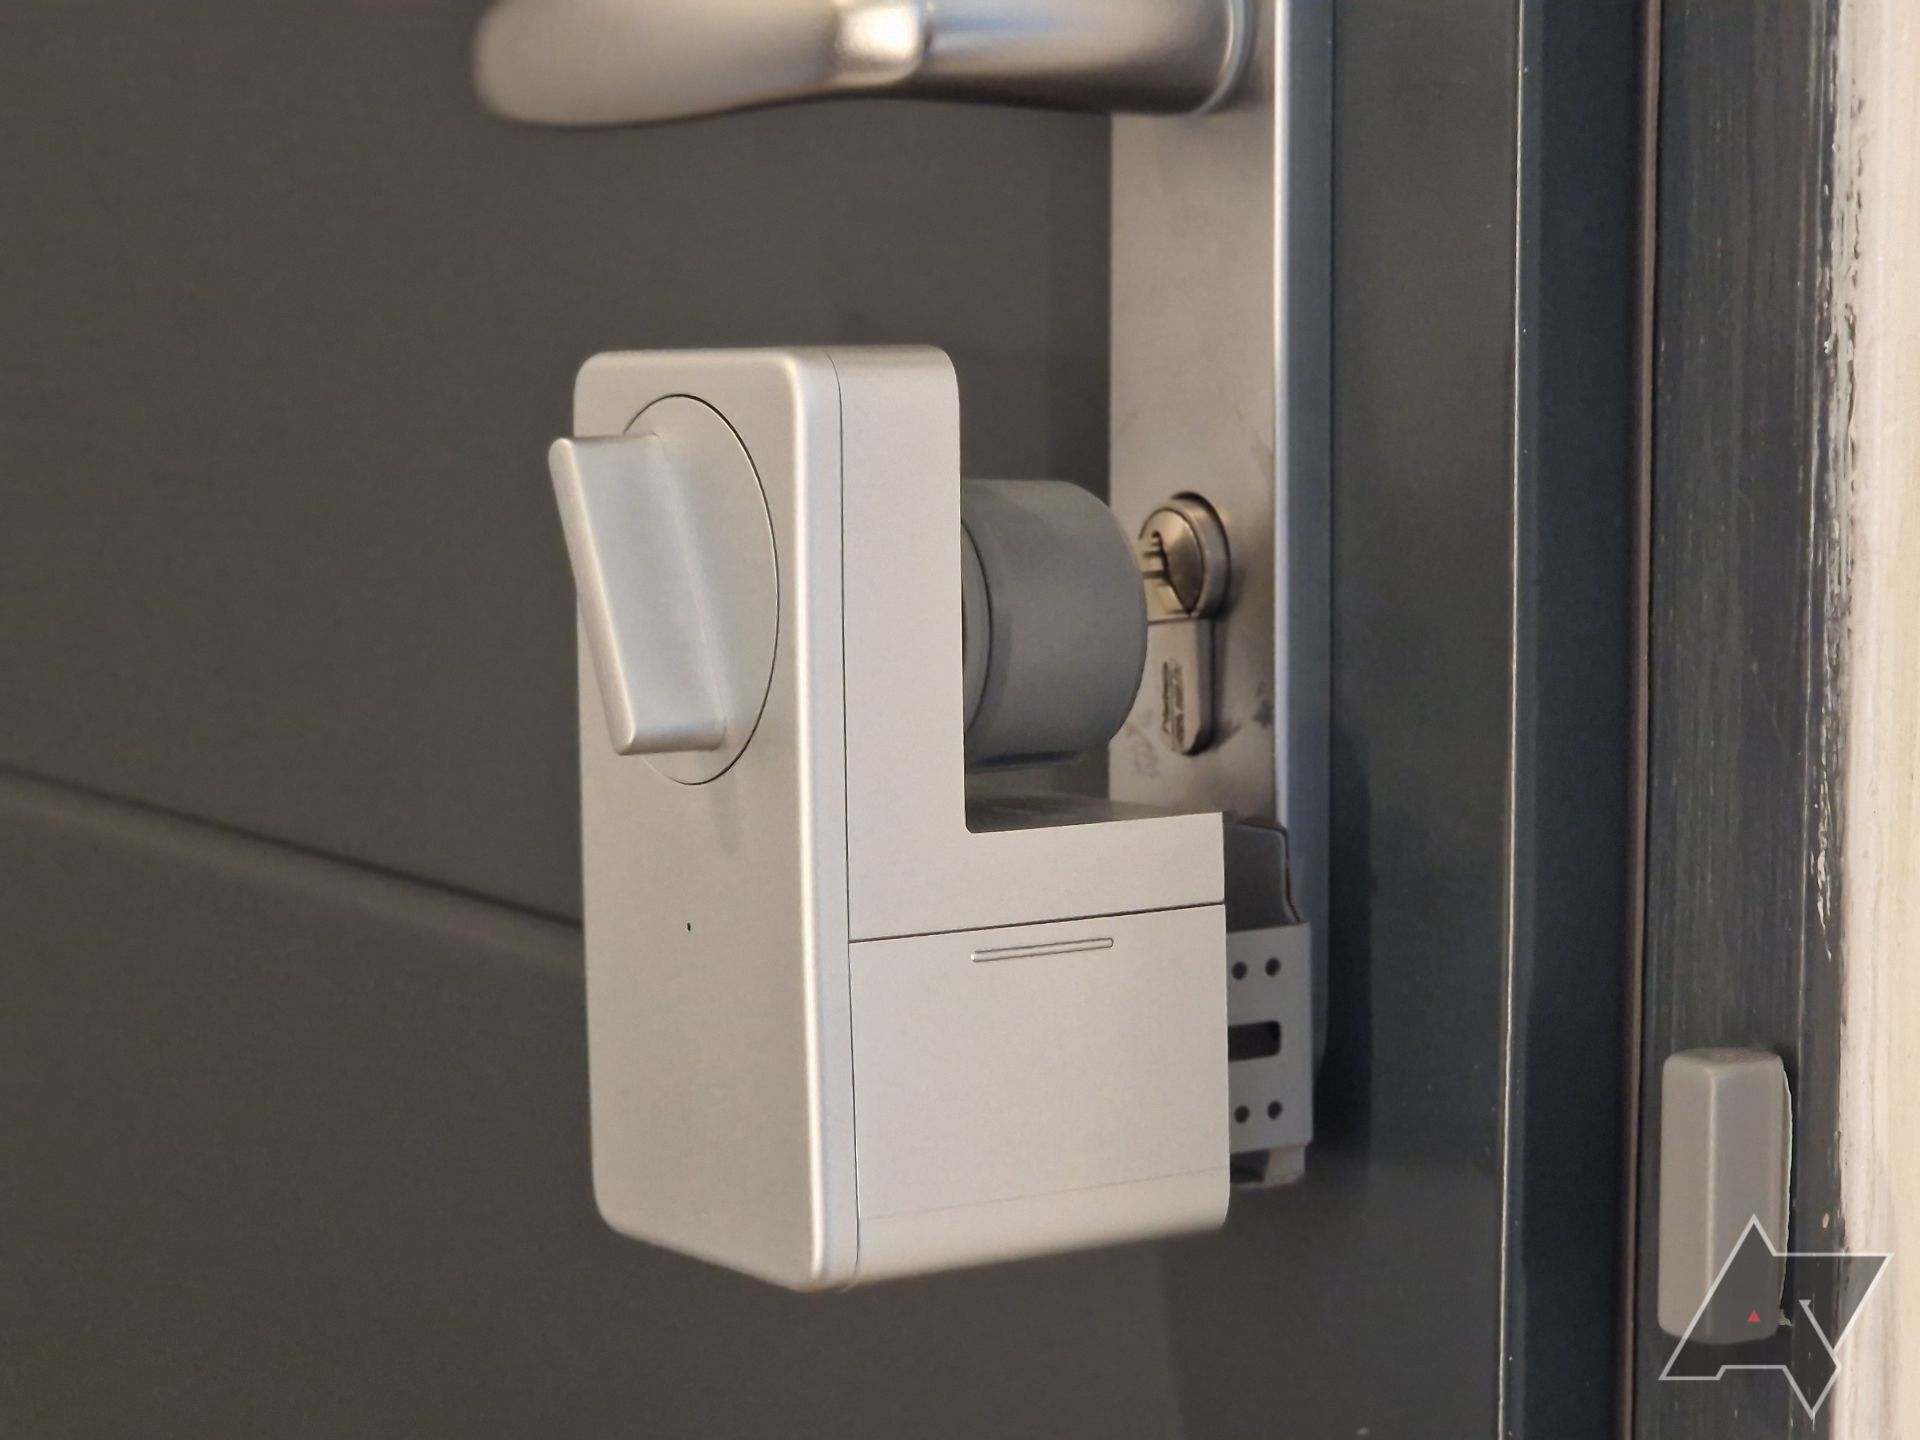 Picture of the SwitchBot Smart Lock attached to the door, with the door sensor on the side